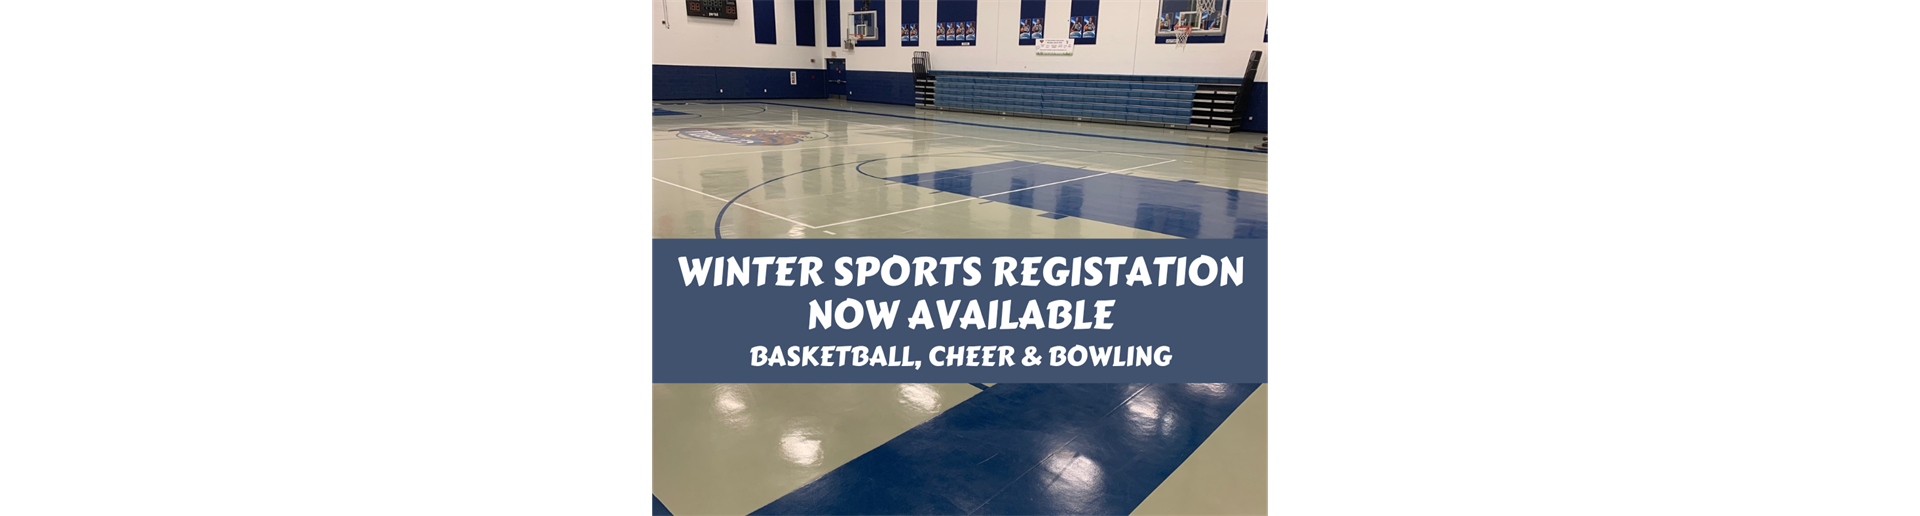 Register now for Winter Sports!